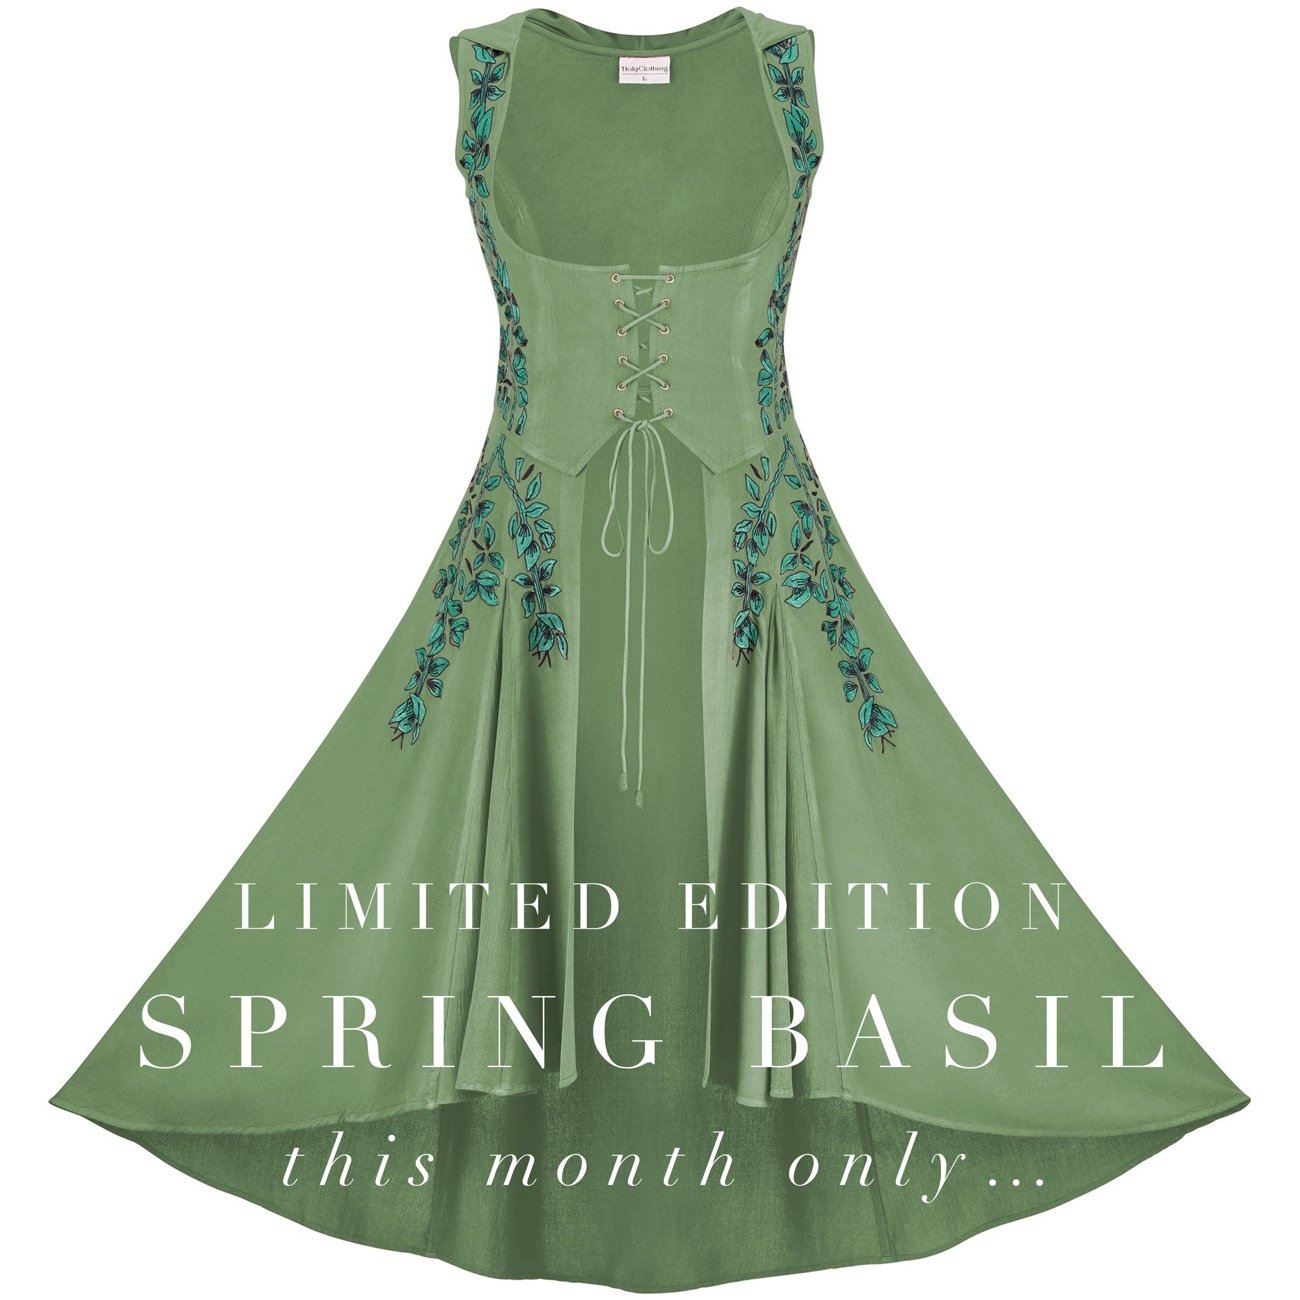 Limited Edition Spring Basil